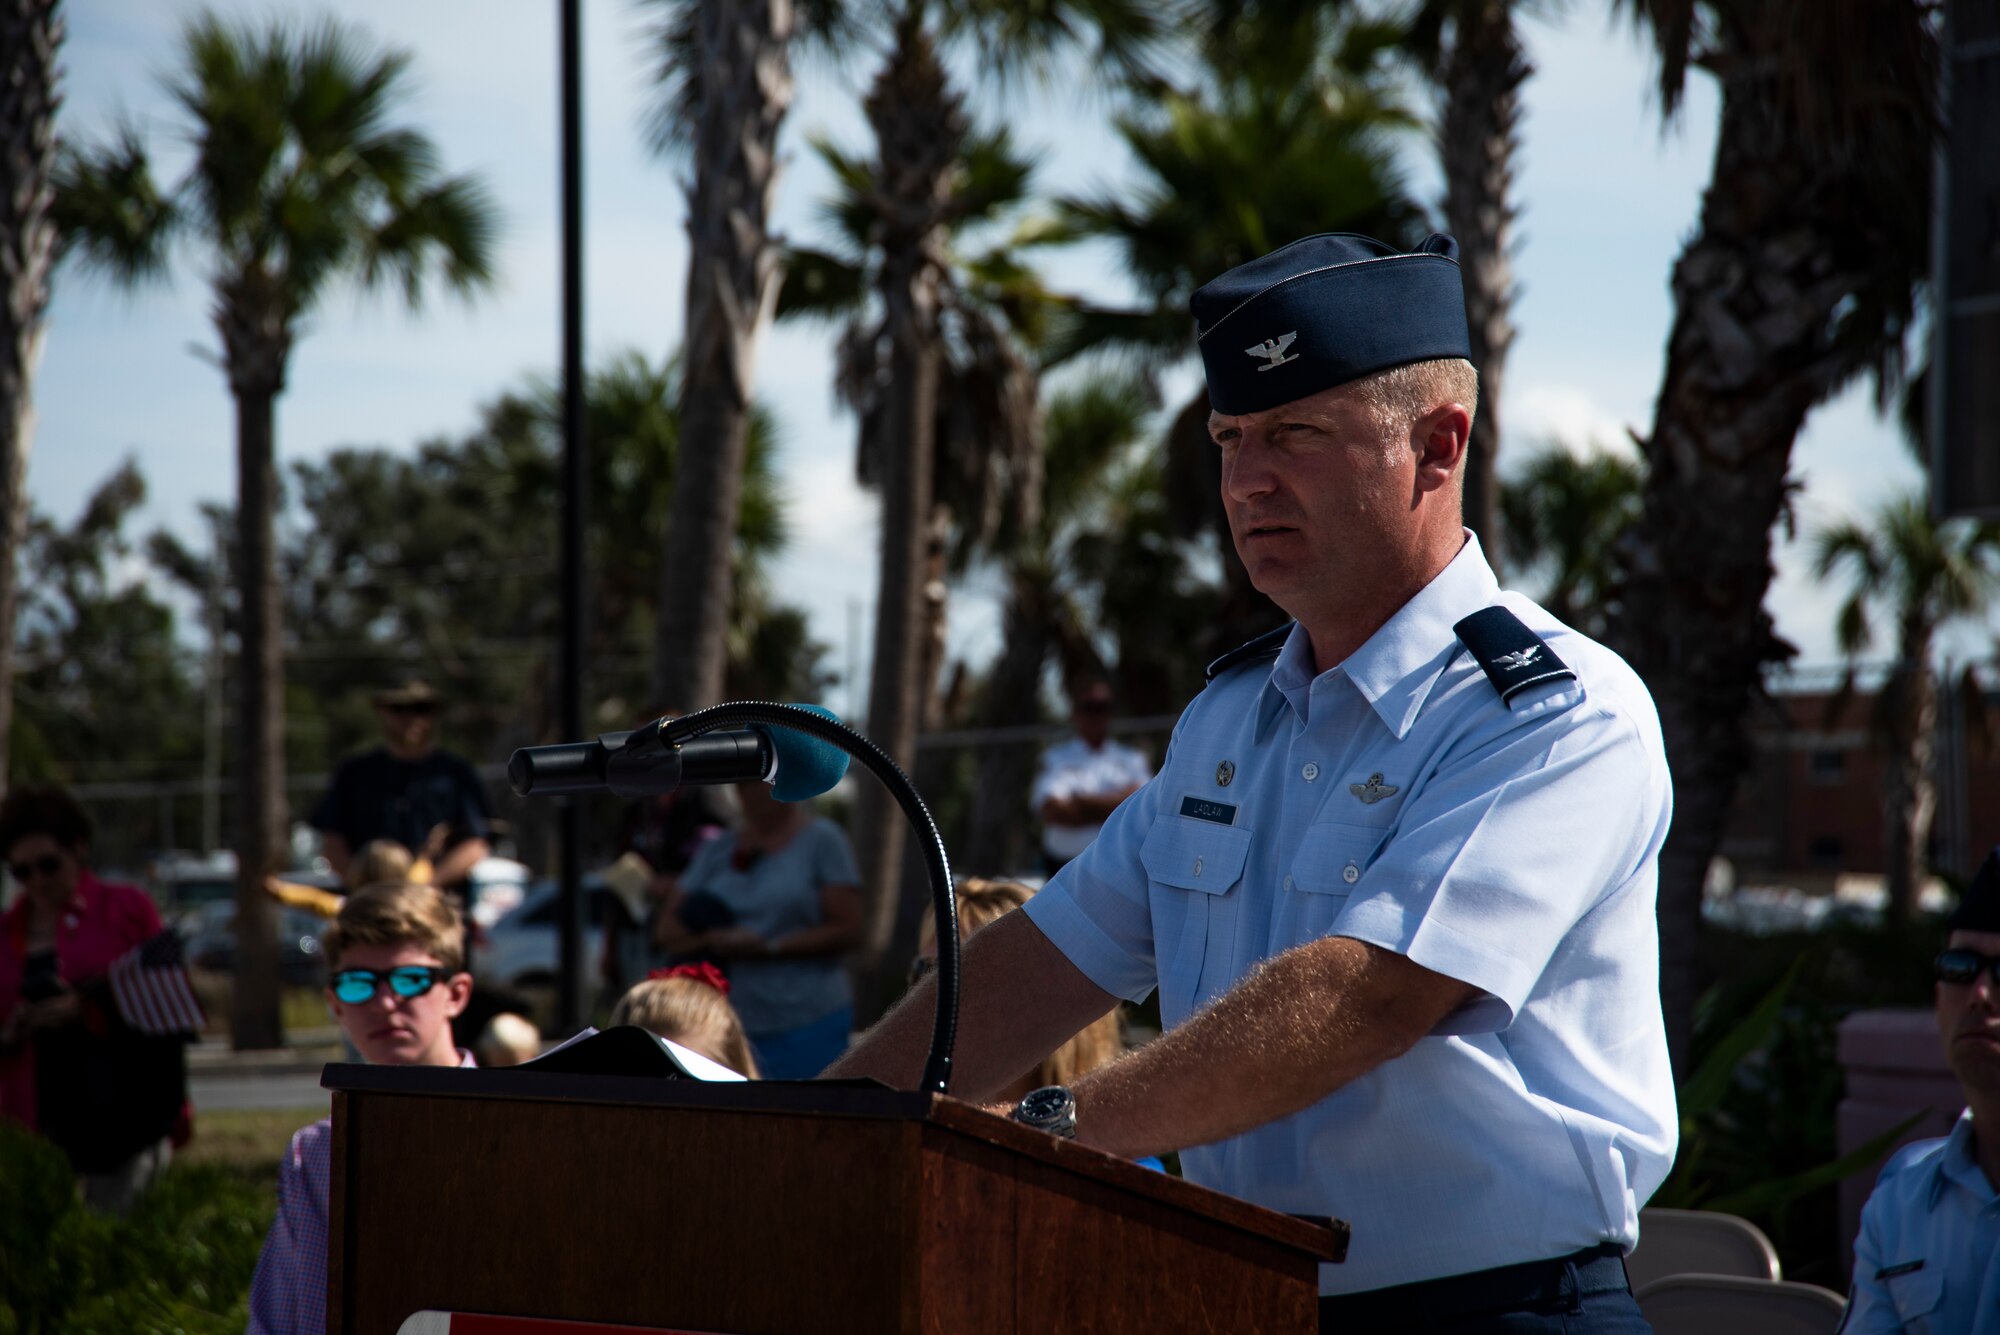 Col. Brian Laidlaw, 325th Fighter Wing commander, delivers a speech at the annual Veterans Day parade celebration and wreath laying ceremony on Nov. 11, 2019, at Panama City, Florida. The annual event celebrated those who served in the past and to honor the sacrifices made by the service member as well as their families, both at home and abroad. Laidlaw thanked many local community members who served in prior conflicts and also thanked Bay County for supporting their veterans. (U.S. Air Force photo by Staff Sgt. Magen M. Reeves)